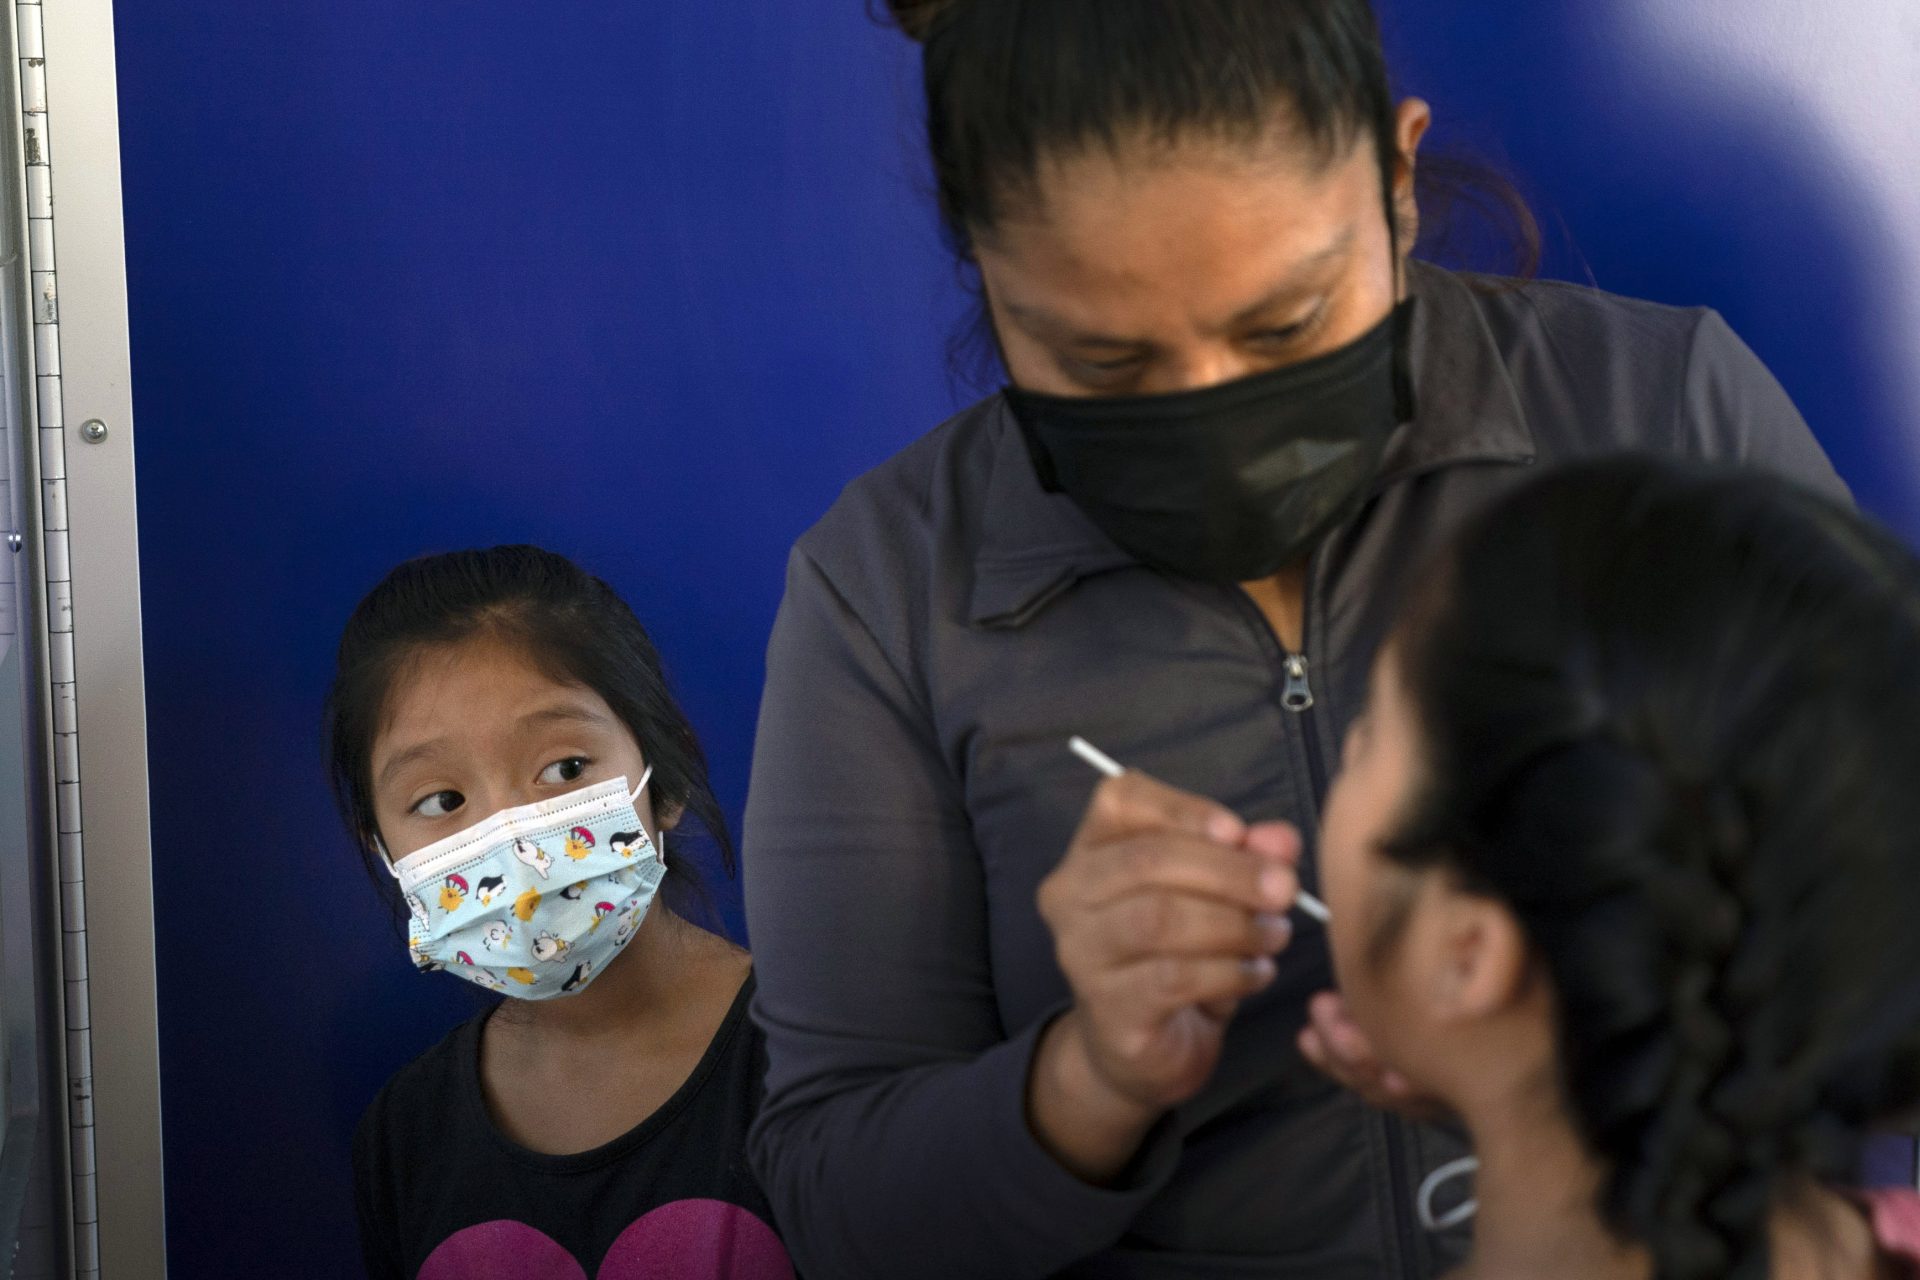 In this Dec. 9, 2020, file photo, Katie Ramirez, left, watches as her mother, Claudia Campos, swabs the mouth of her daughter, Hailey, for a COVID-19 test at a testing site in Los Angeles. As officials met to discuss approval of a COVID-19 vaccine on Thursday, Dec. 10, the number of coronavirus deaths has grown bleaker than ever.